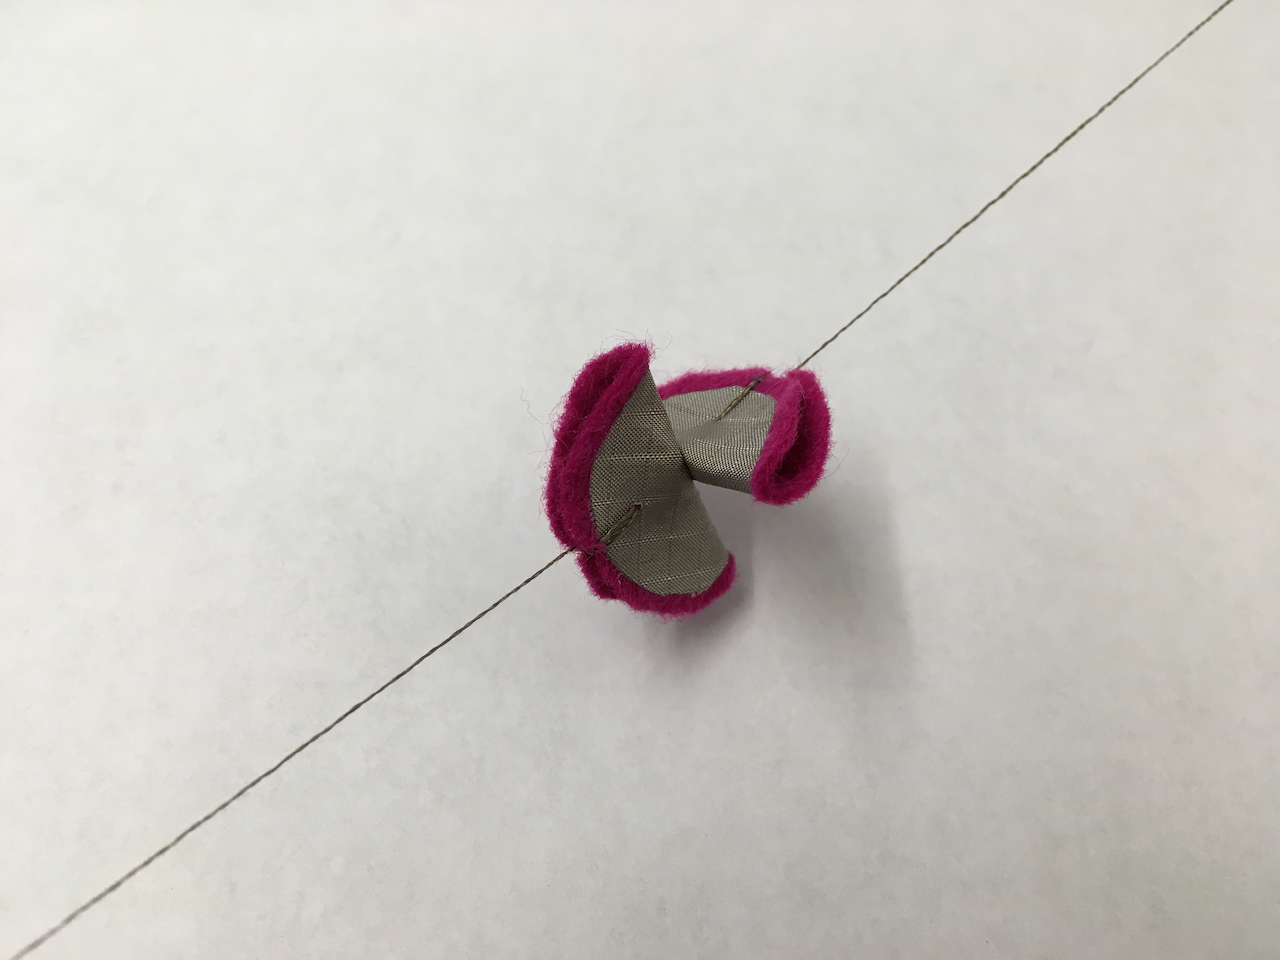 Two small pieces of felt covered in conductive fabric held in contact with tiny magnets